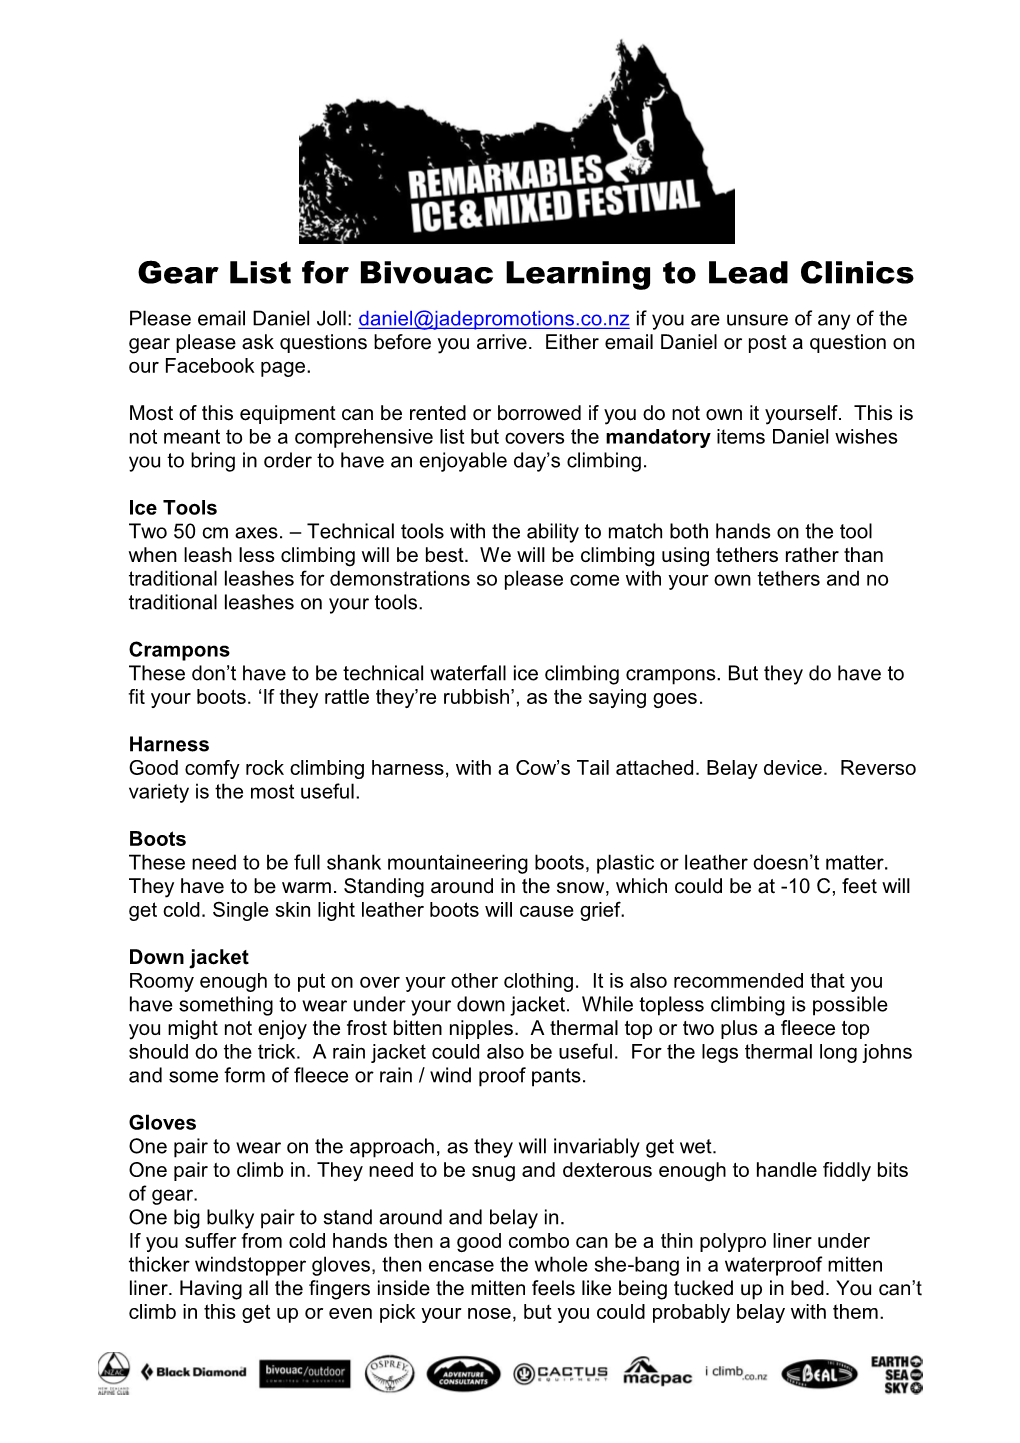 Gear List for Bivouac Learning to Lead Clinics